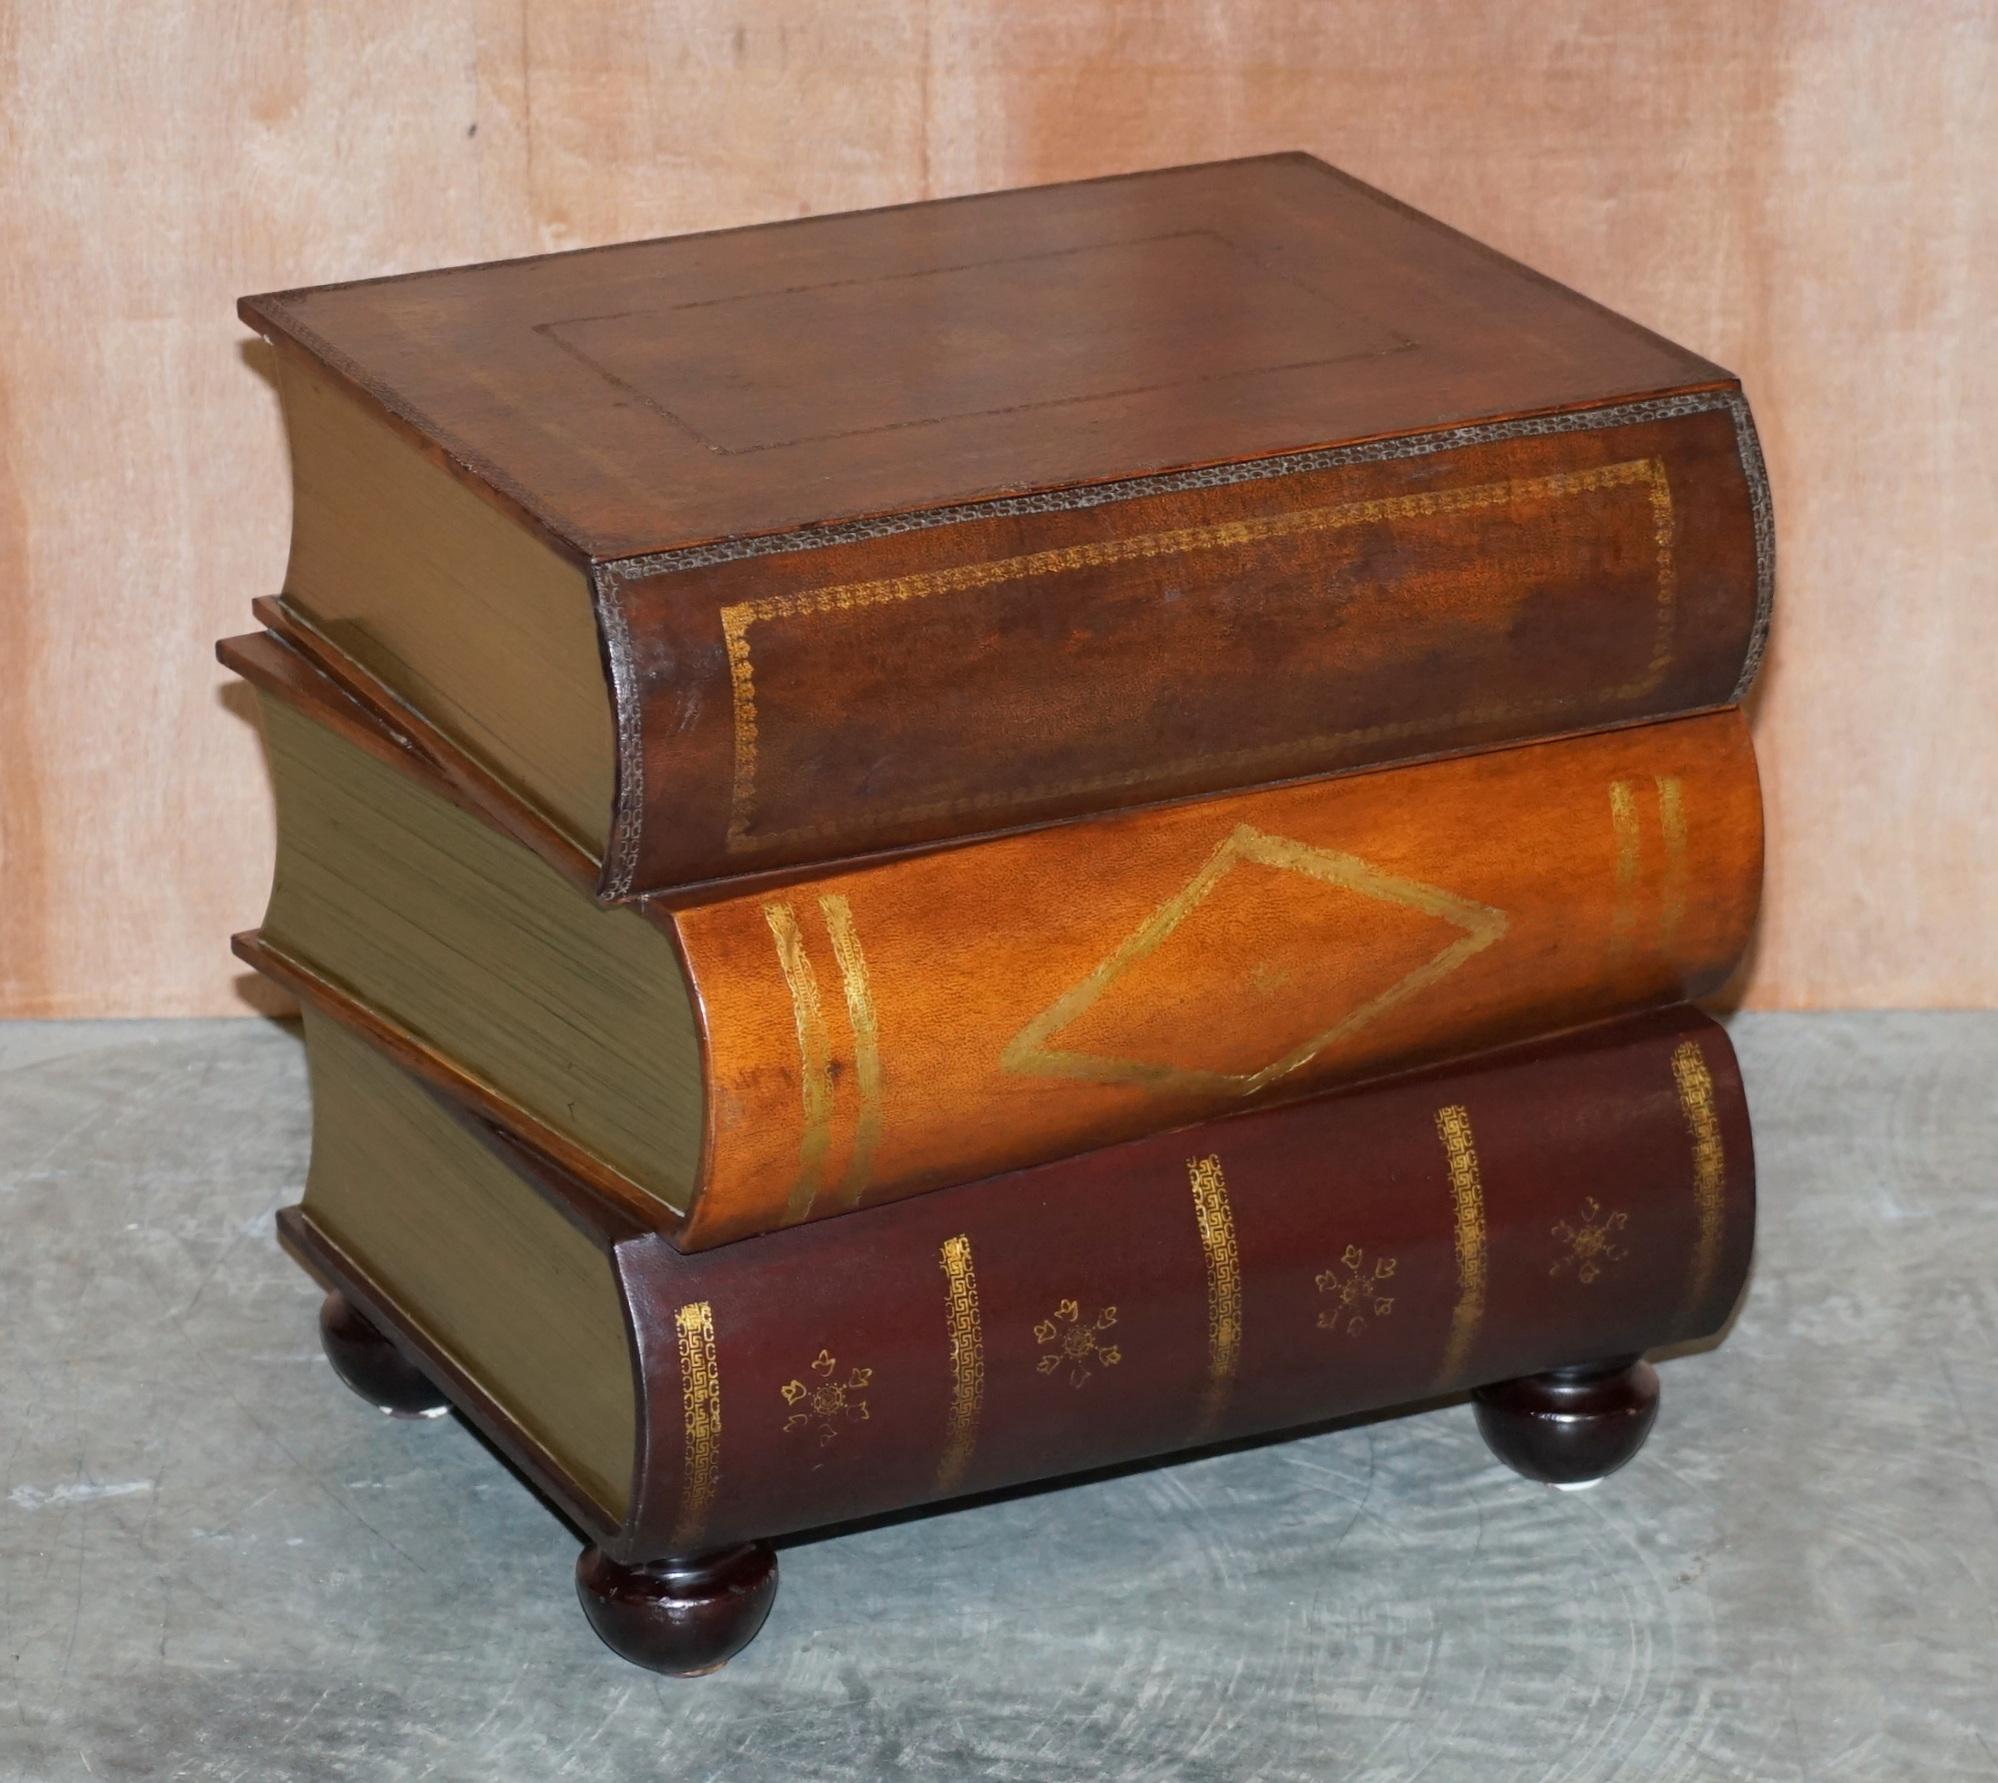 We are delighted to offer for sale this lovely pair of Scholars Library stack of books side tables with drawers

A very good looking and decorative pair of side tables, they look interesting and decorative in any setting. Each table has a single